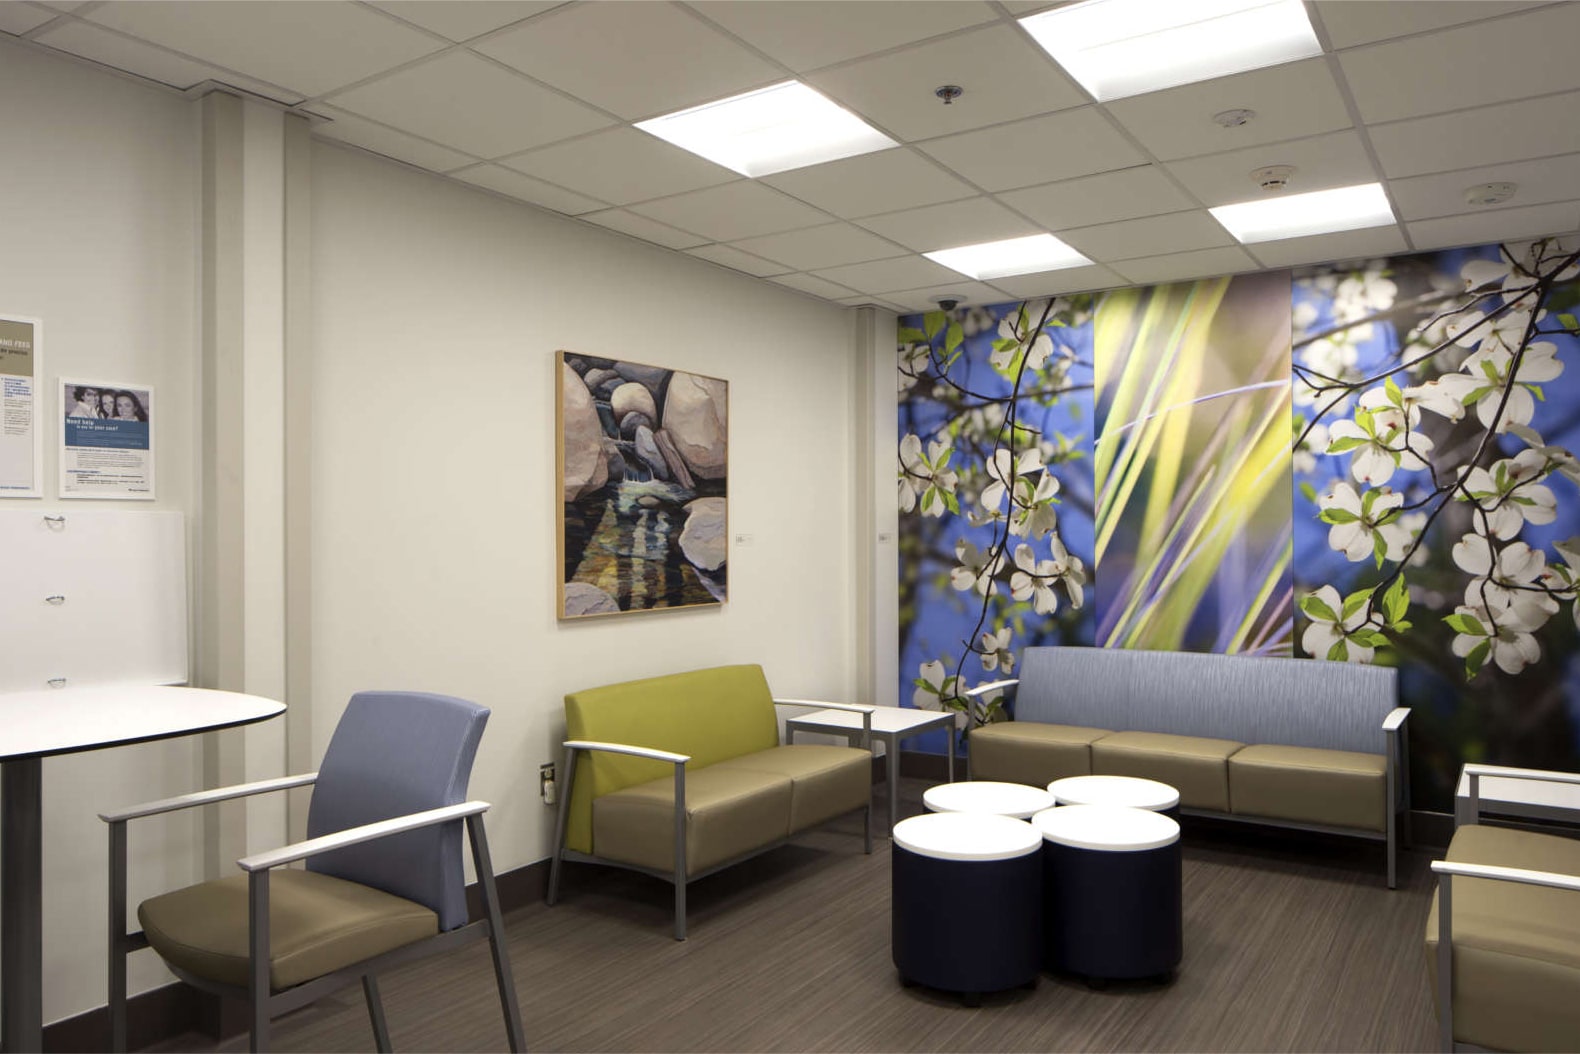 Waiting room with seating at the Kaiser Permanente Emergency Department Expansion at the Sacramento Medical Center